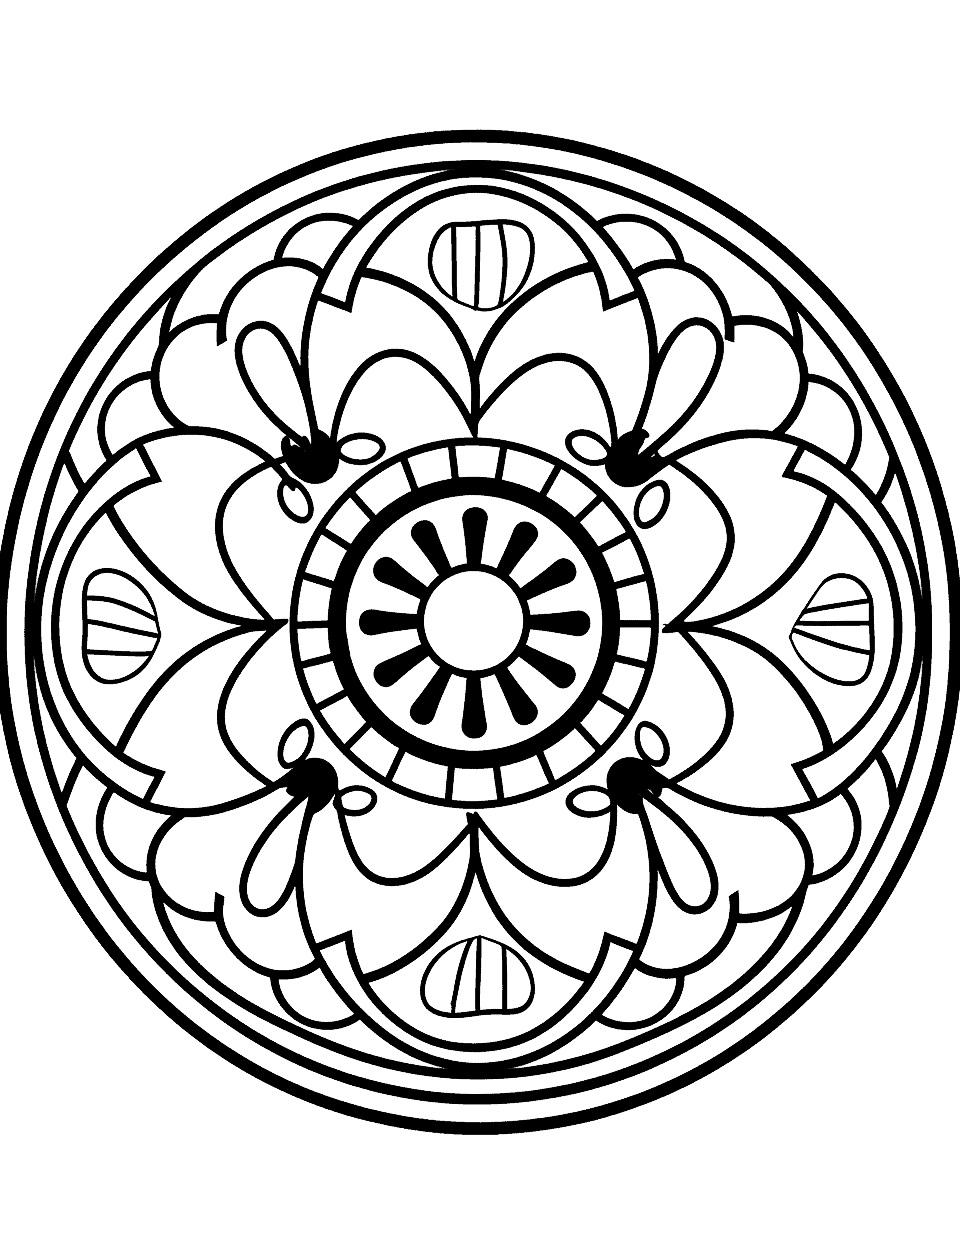 Lively Ladybug Mandala Coloring Page - A cute mandala with a ladybug at its center, surrounded by leafy patterns and daisies, perfect for young kids.